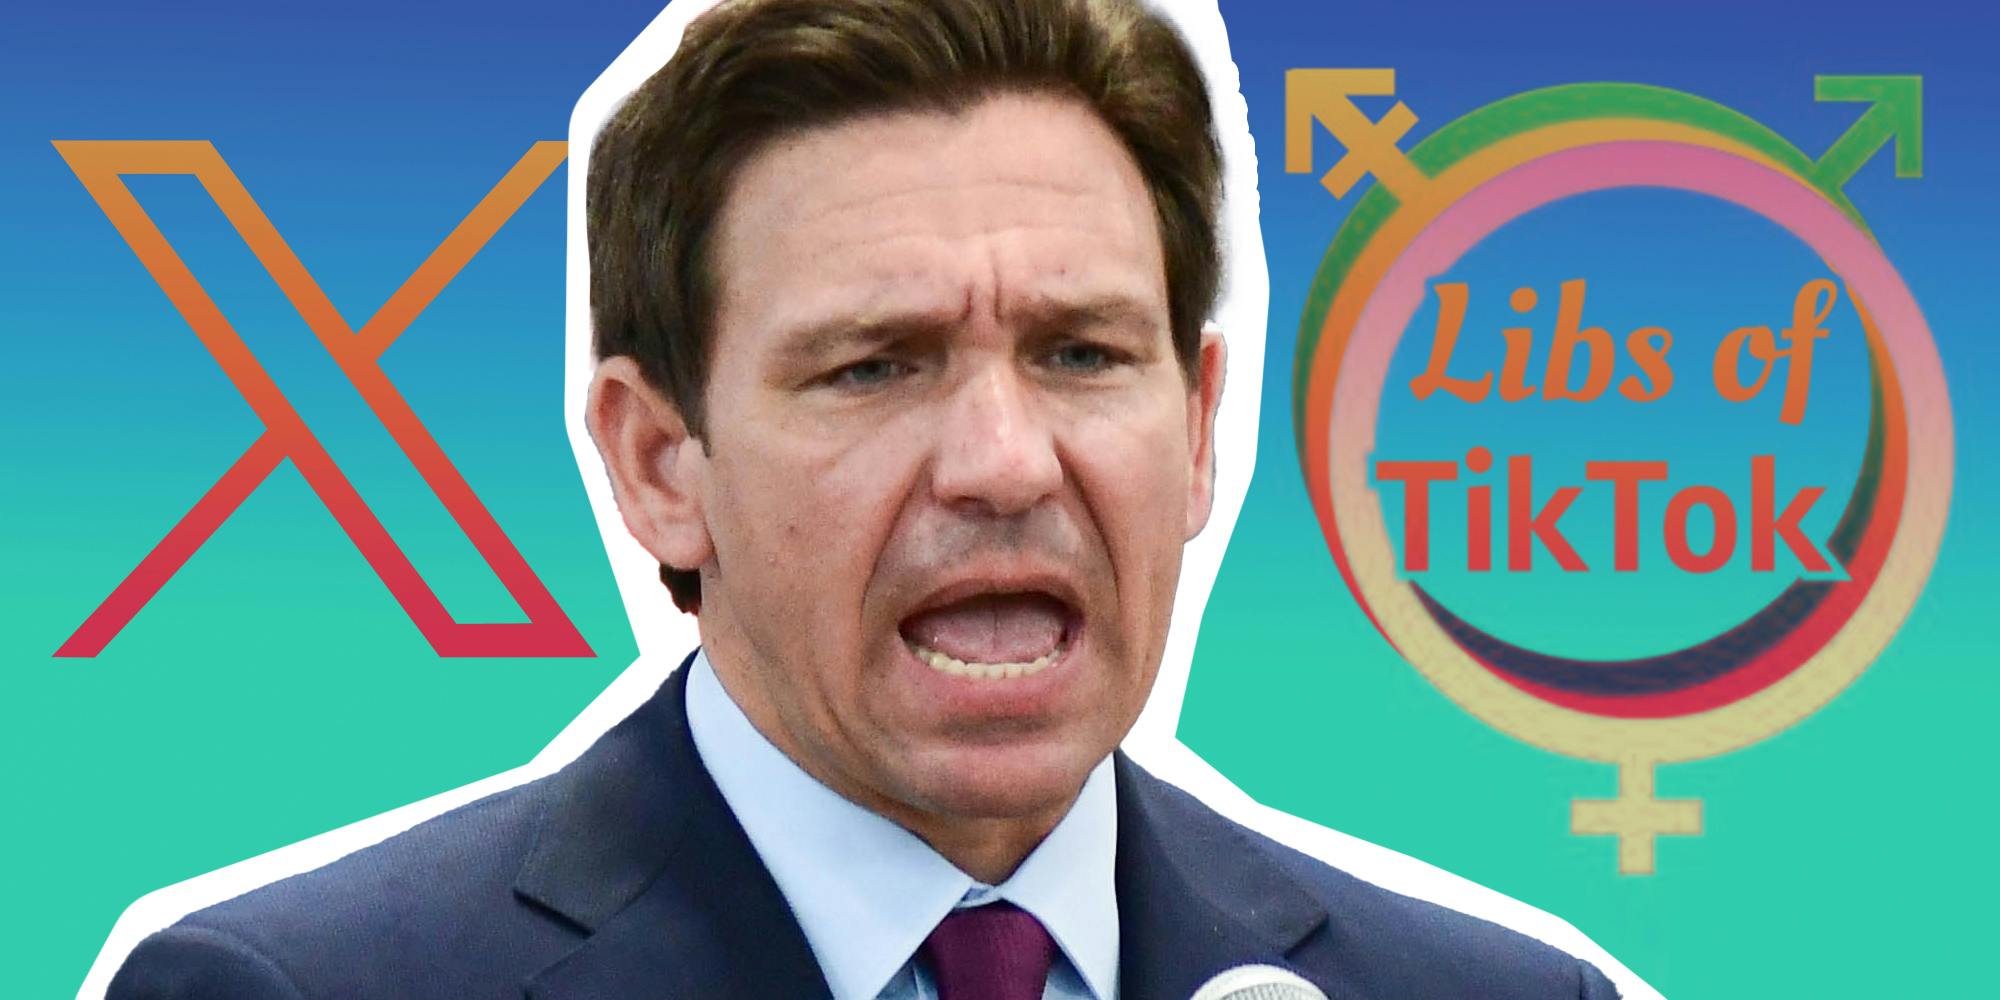 Ron DeSantis in front of x and libs of tiktok logo